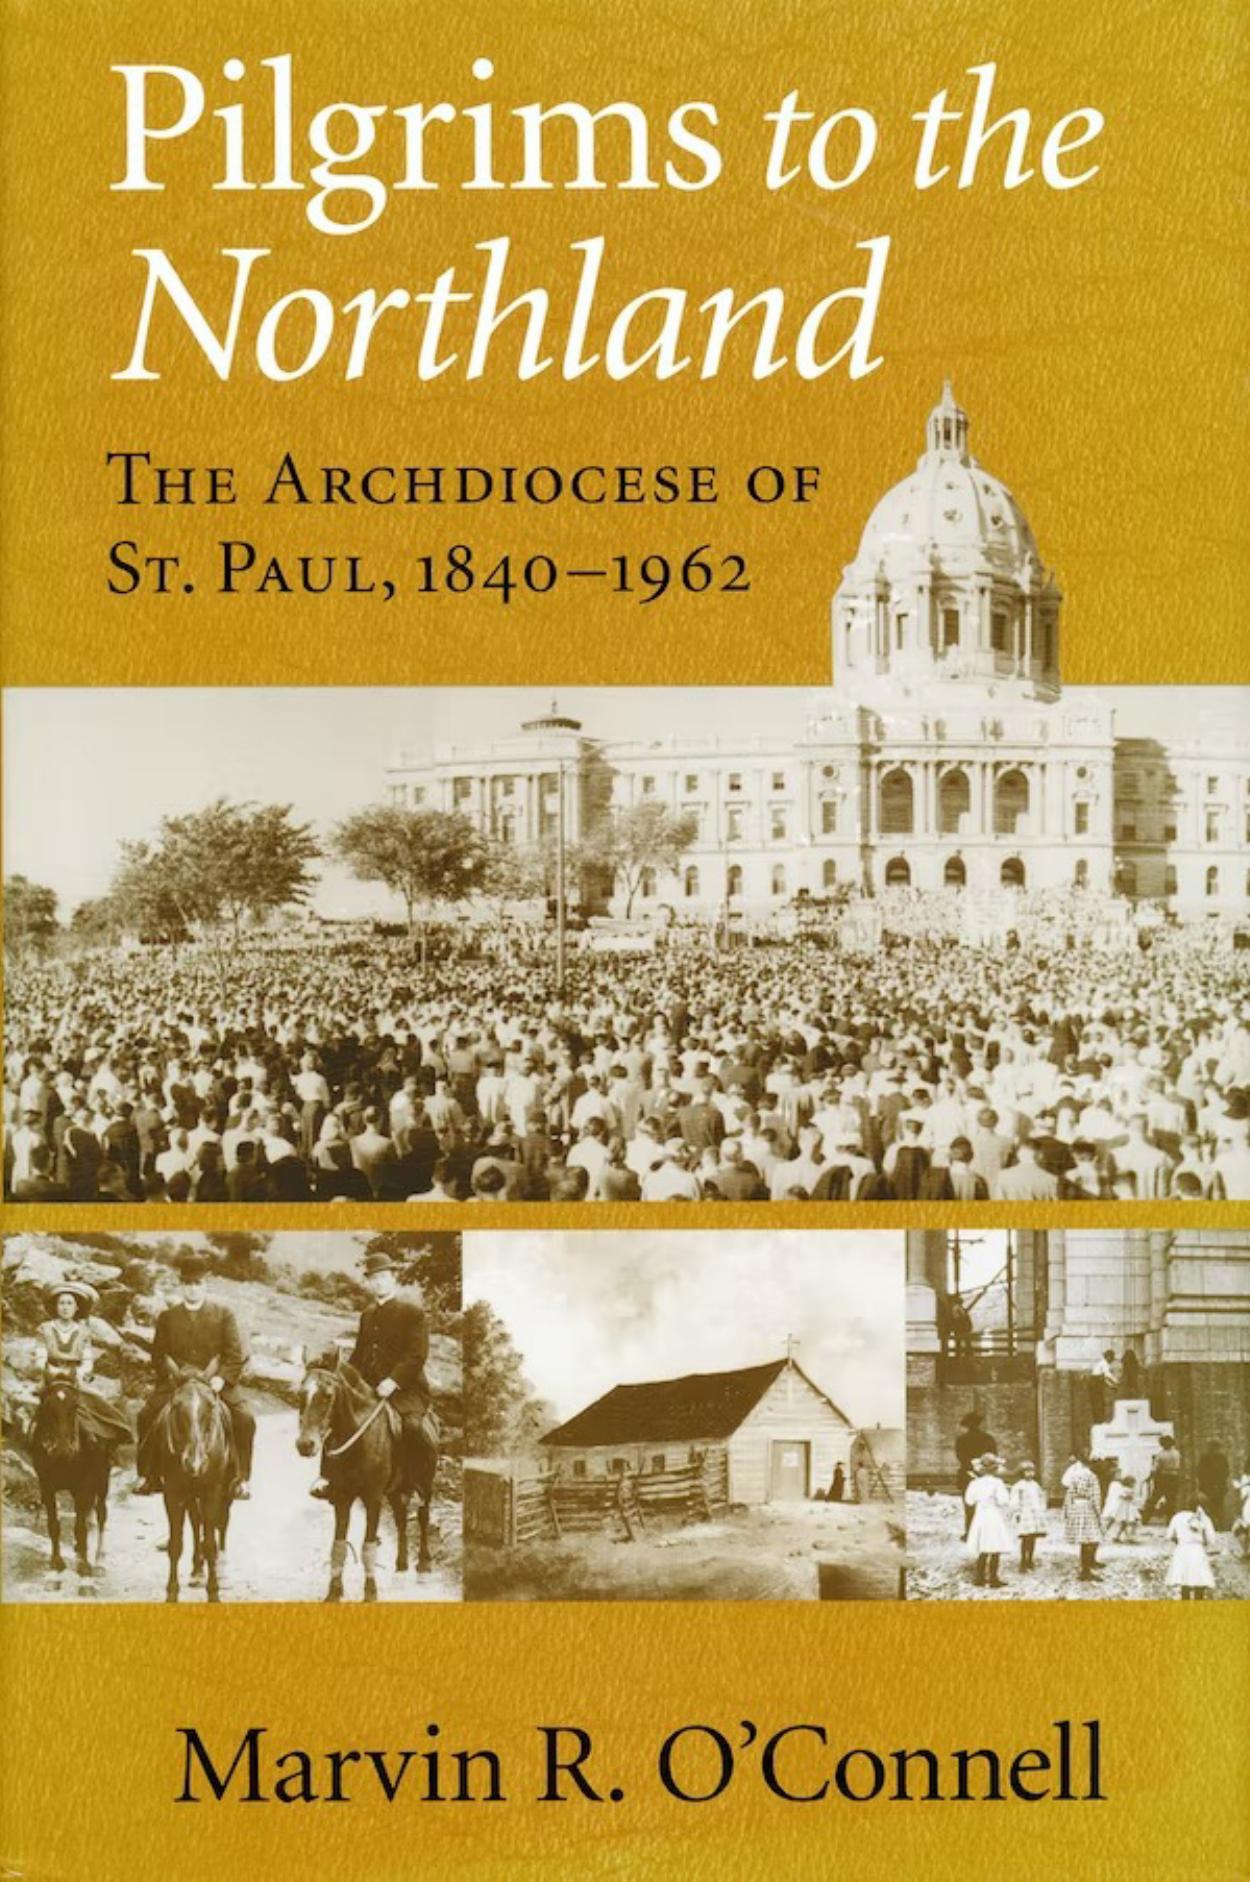 Pilgrims to the Northland : The Archdiocese of St. Paul, 1840-1962 by Marvin R. O'Connell